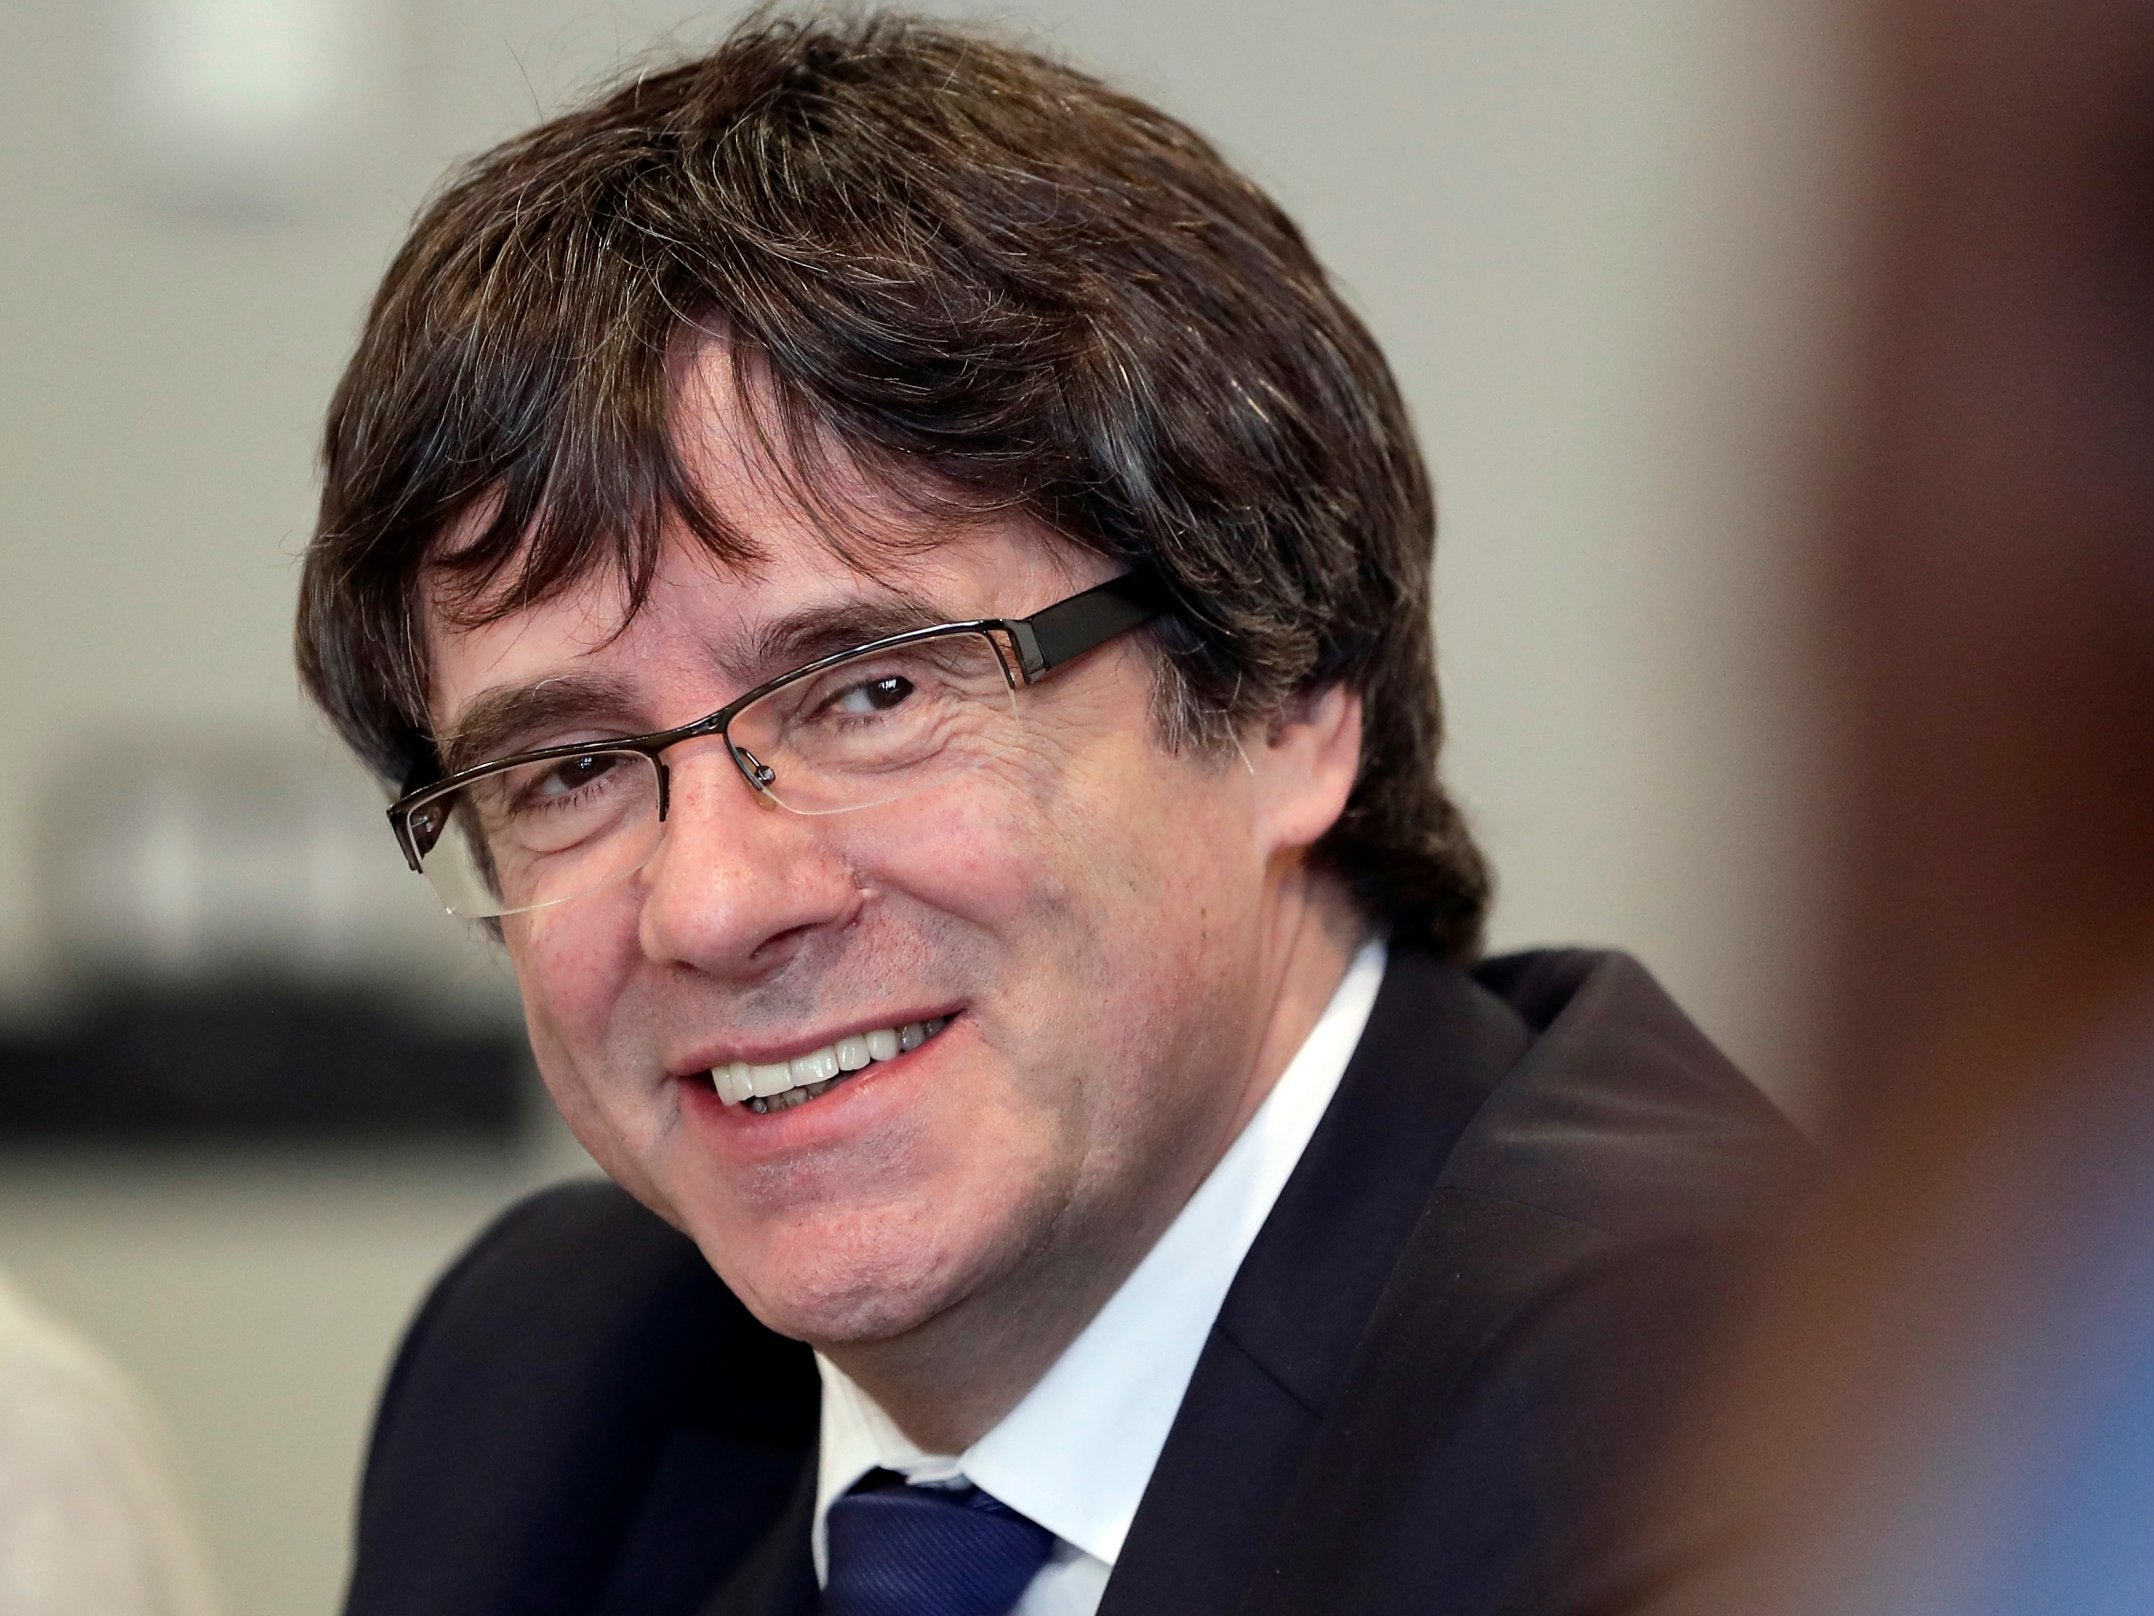 Carles Puigdemont, the former president of Catalonia, was arrested in Germany as he was travelling from Finland to Brussels